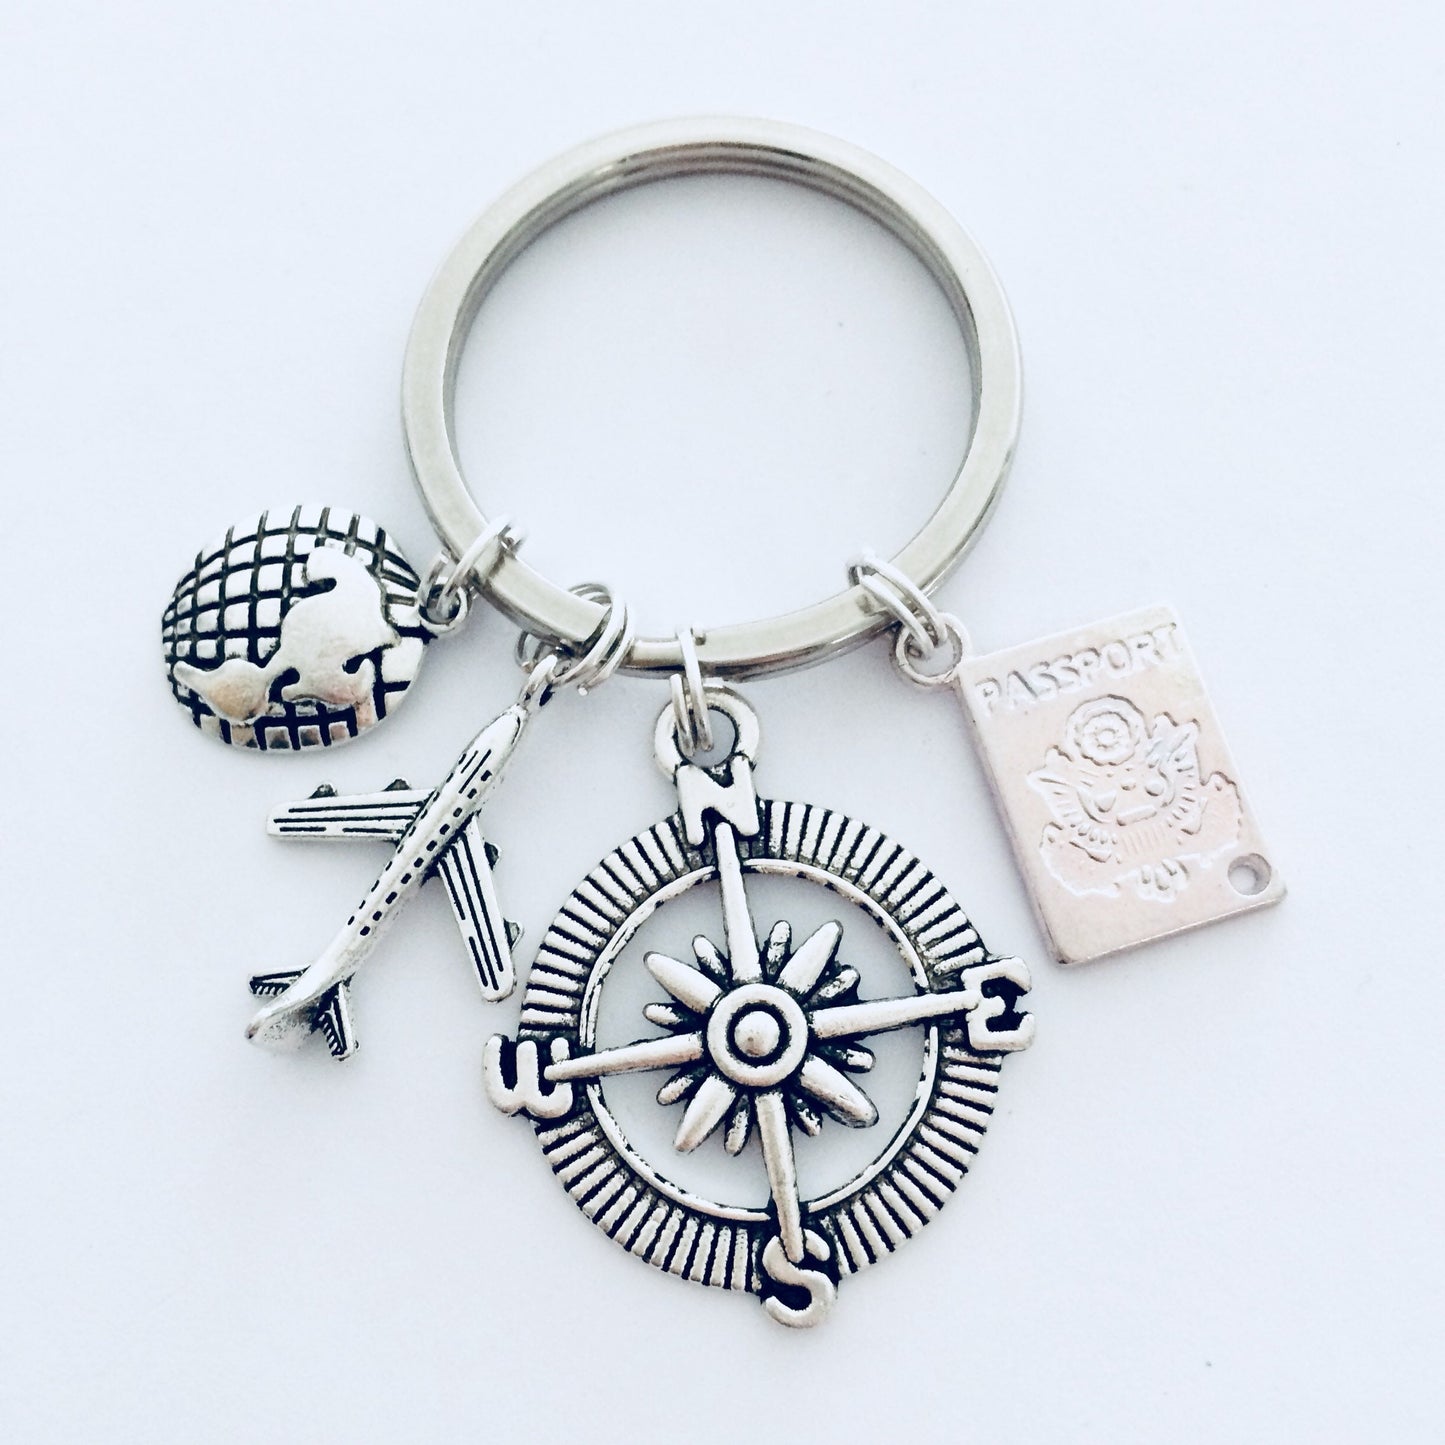 Travel Keychain, Keyring, Bag Charm, Travel Accessory, Compass, Travelling Gift, Luggage Keyring, Earth Gift, Aeroplane Gift, Passport Gift.